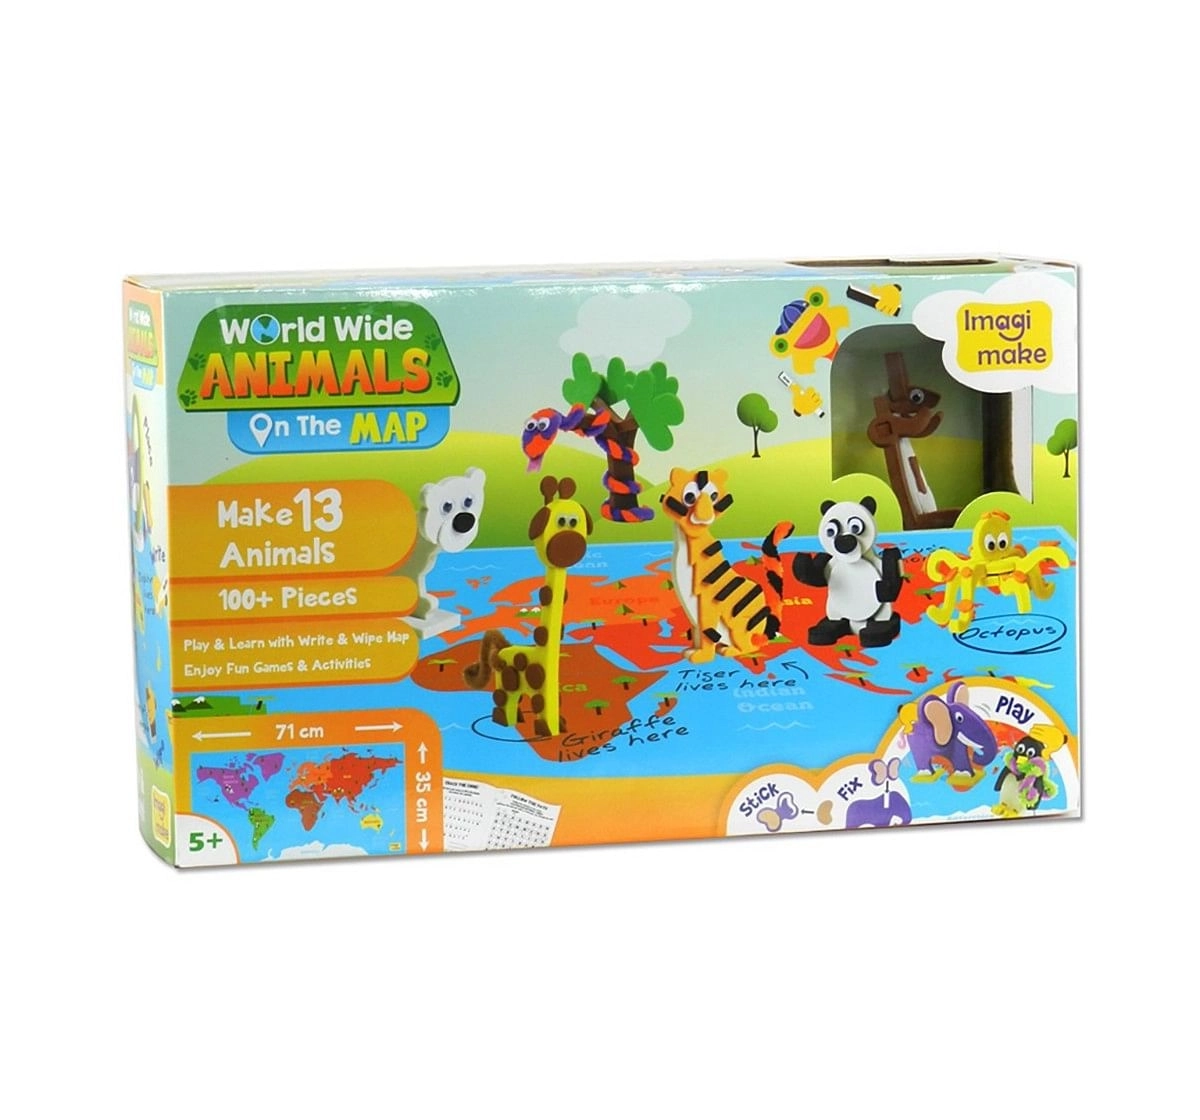  Imagimake World Wide Animals On The Map DIY Art & Craft Kit for Kids age 3Y+ 